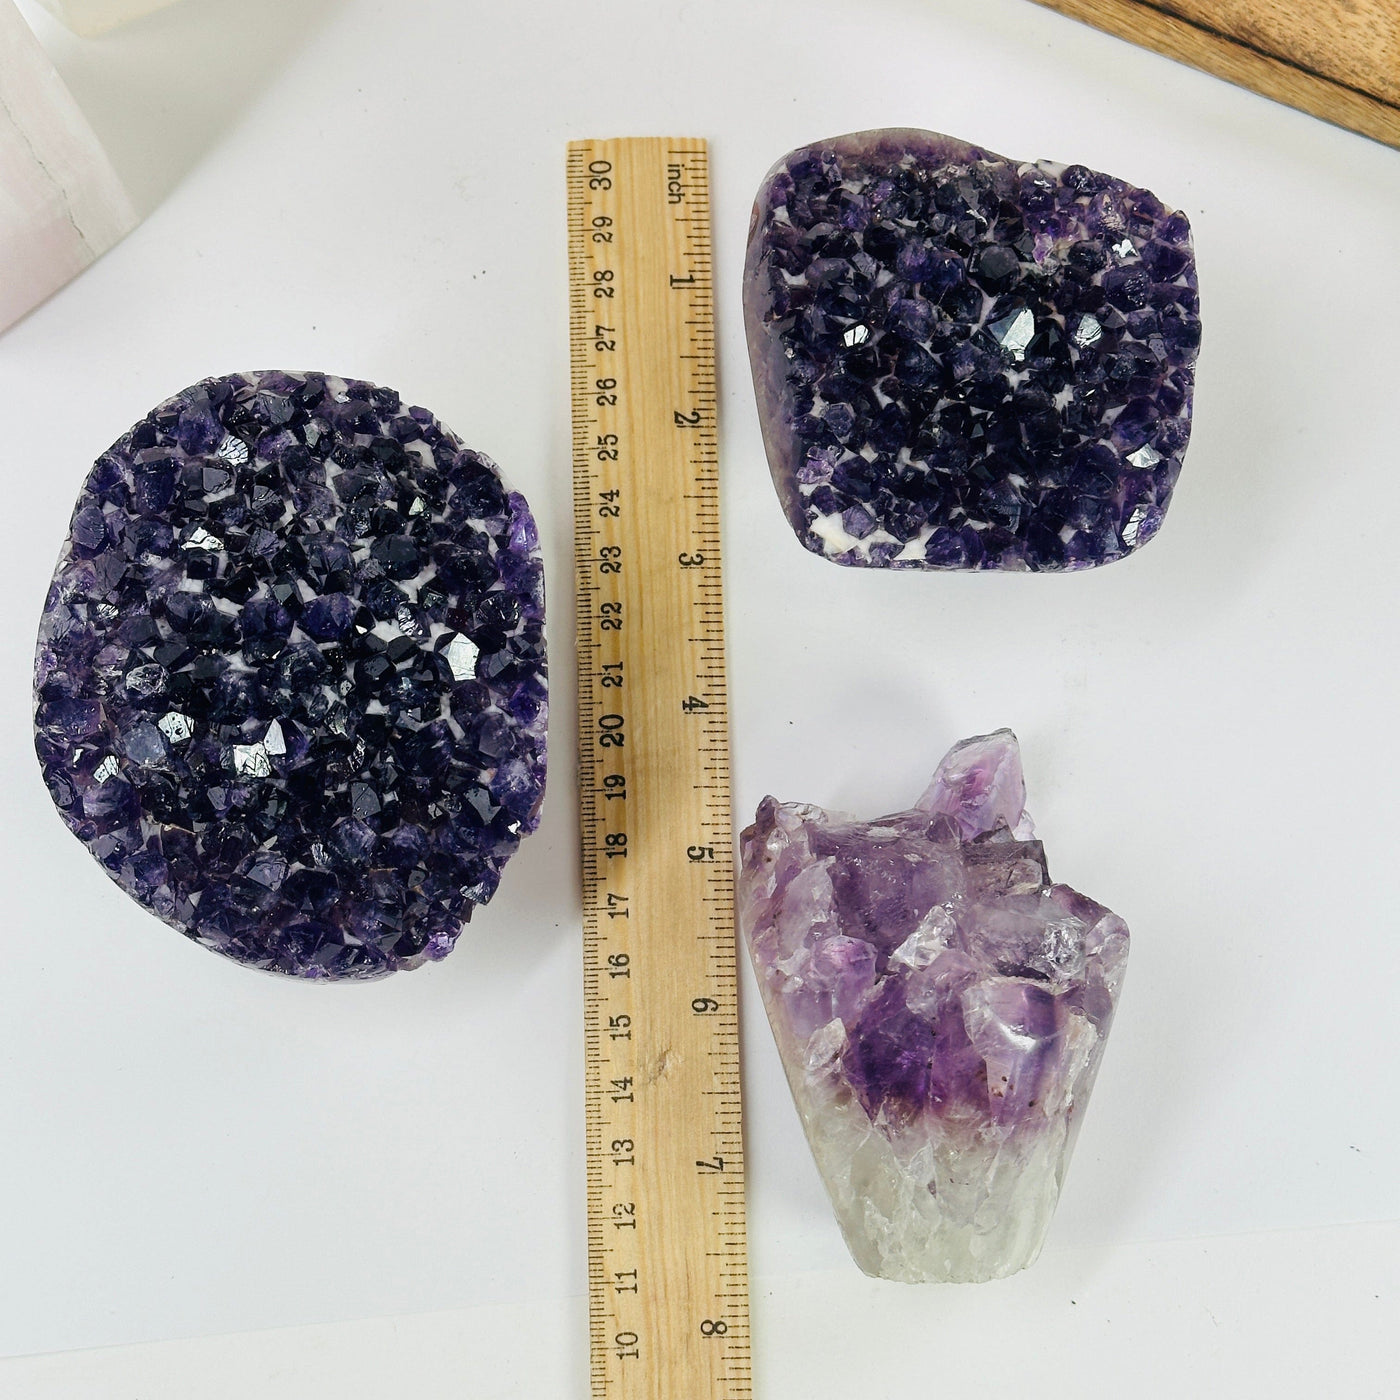 amethyst crystal flowers next to a ruler for size reference